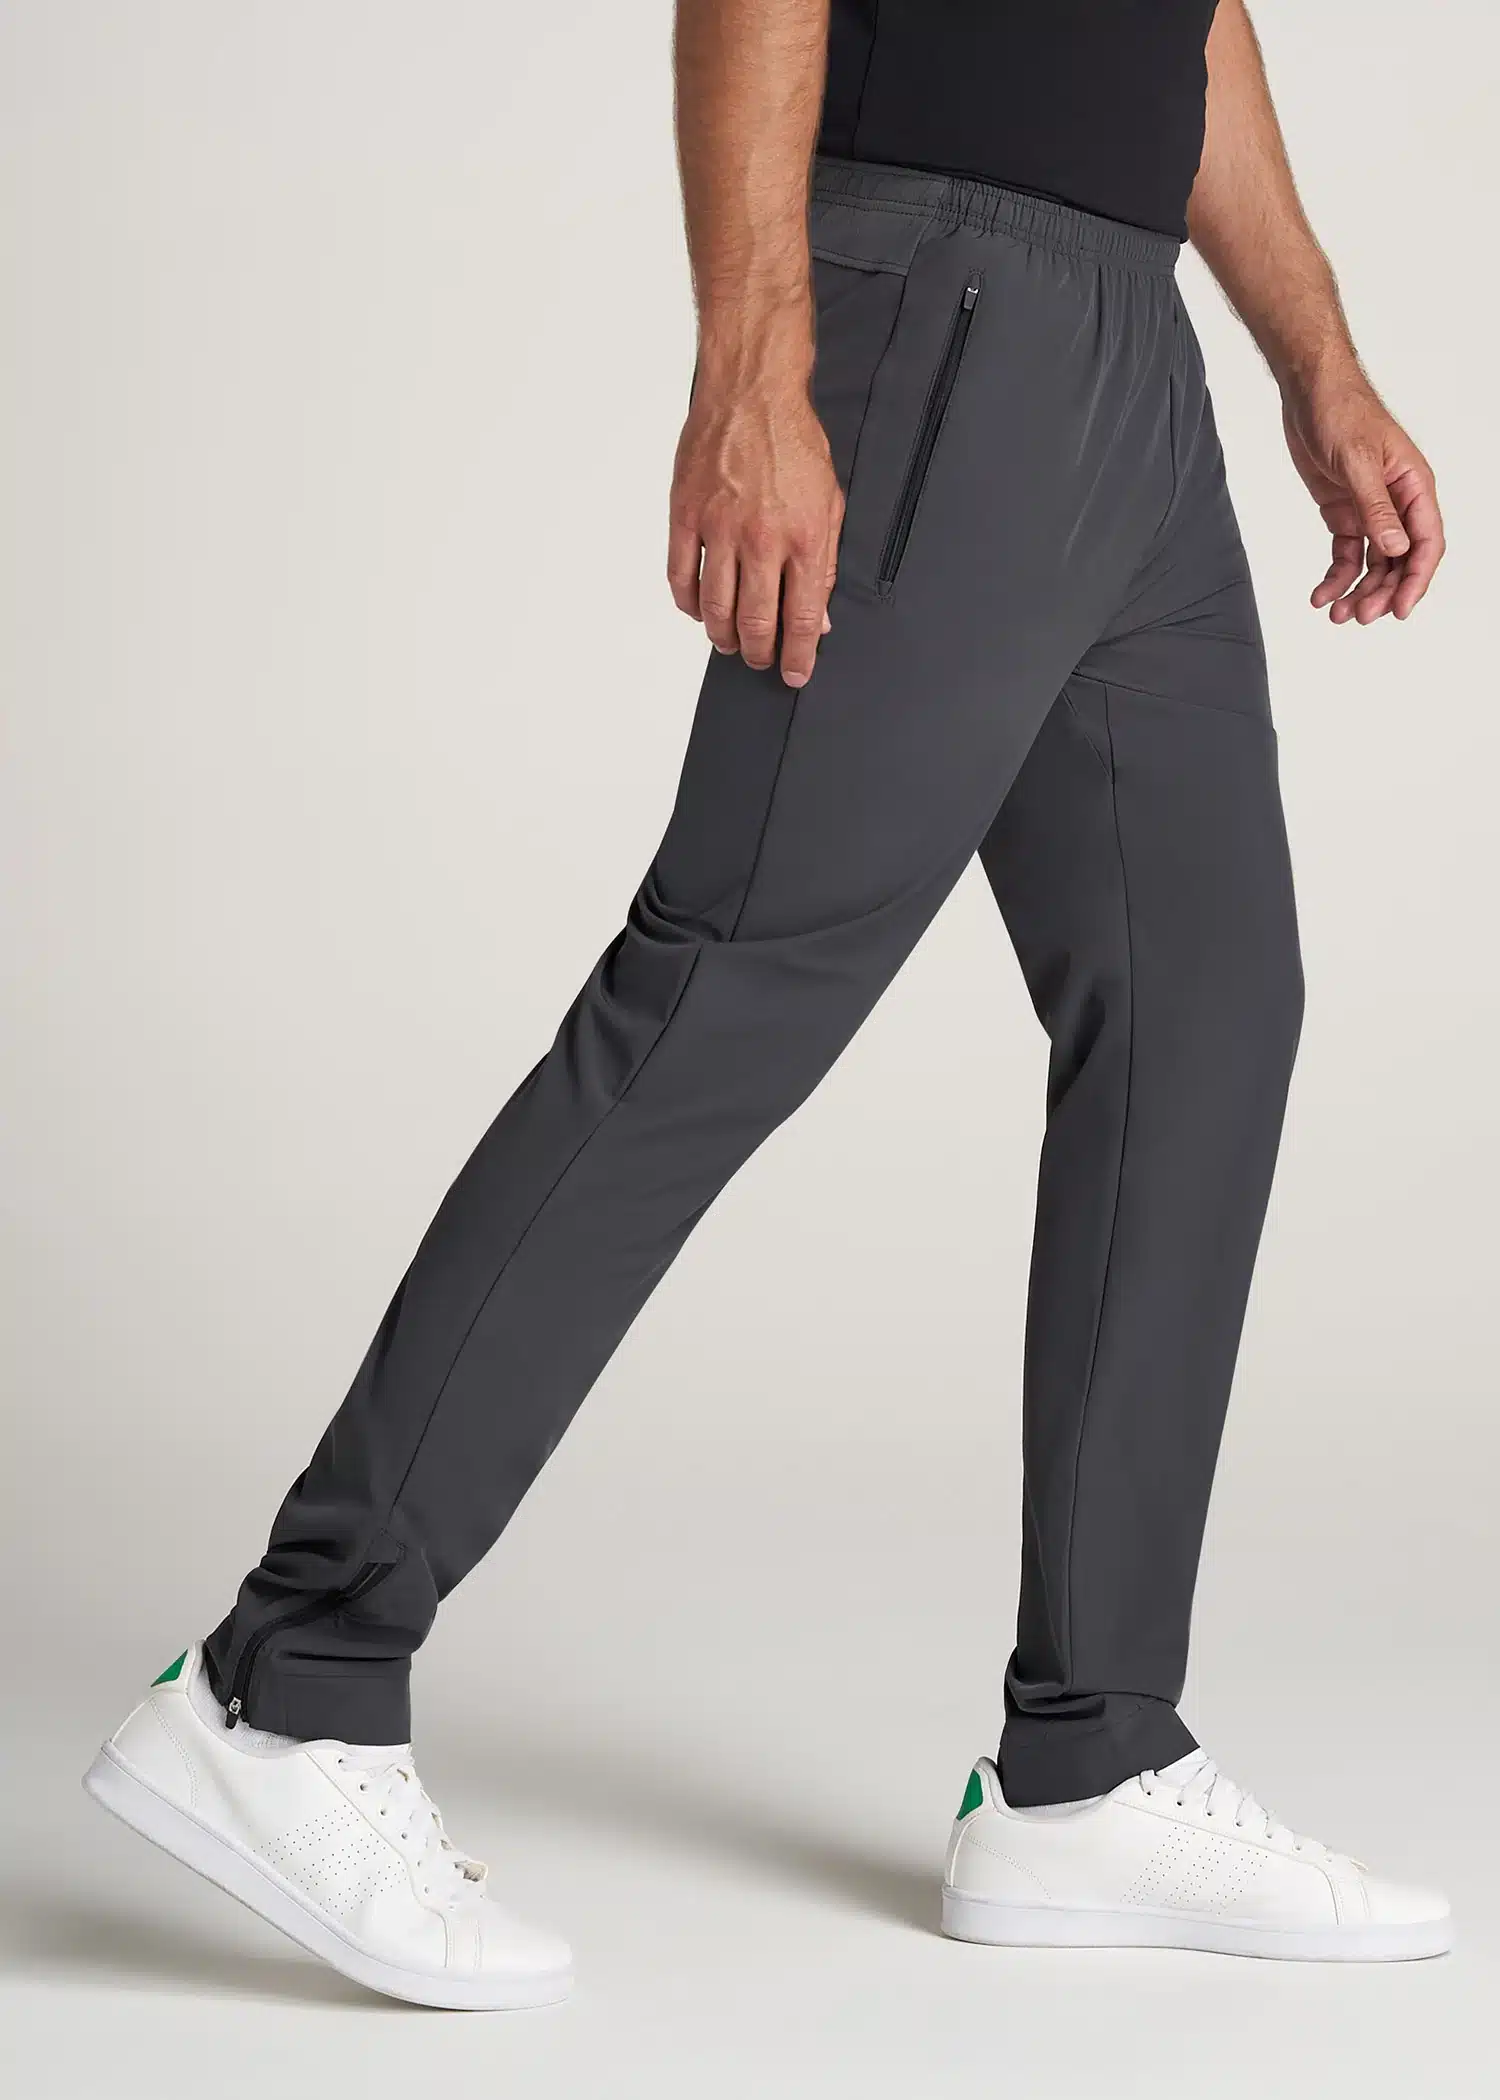 NEW 'Speedy' SLIM Tall Men's Athletic Pants - 5 Colors to Choose From! –